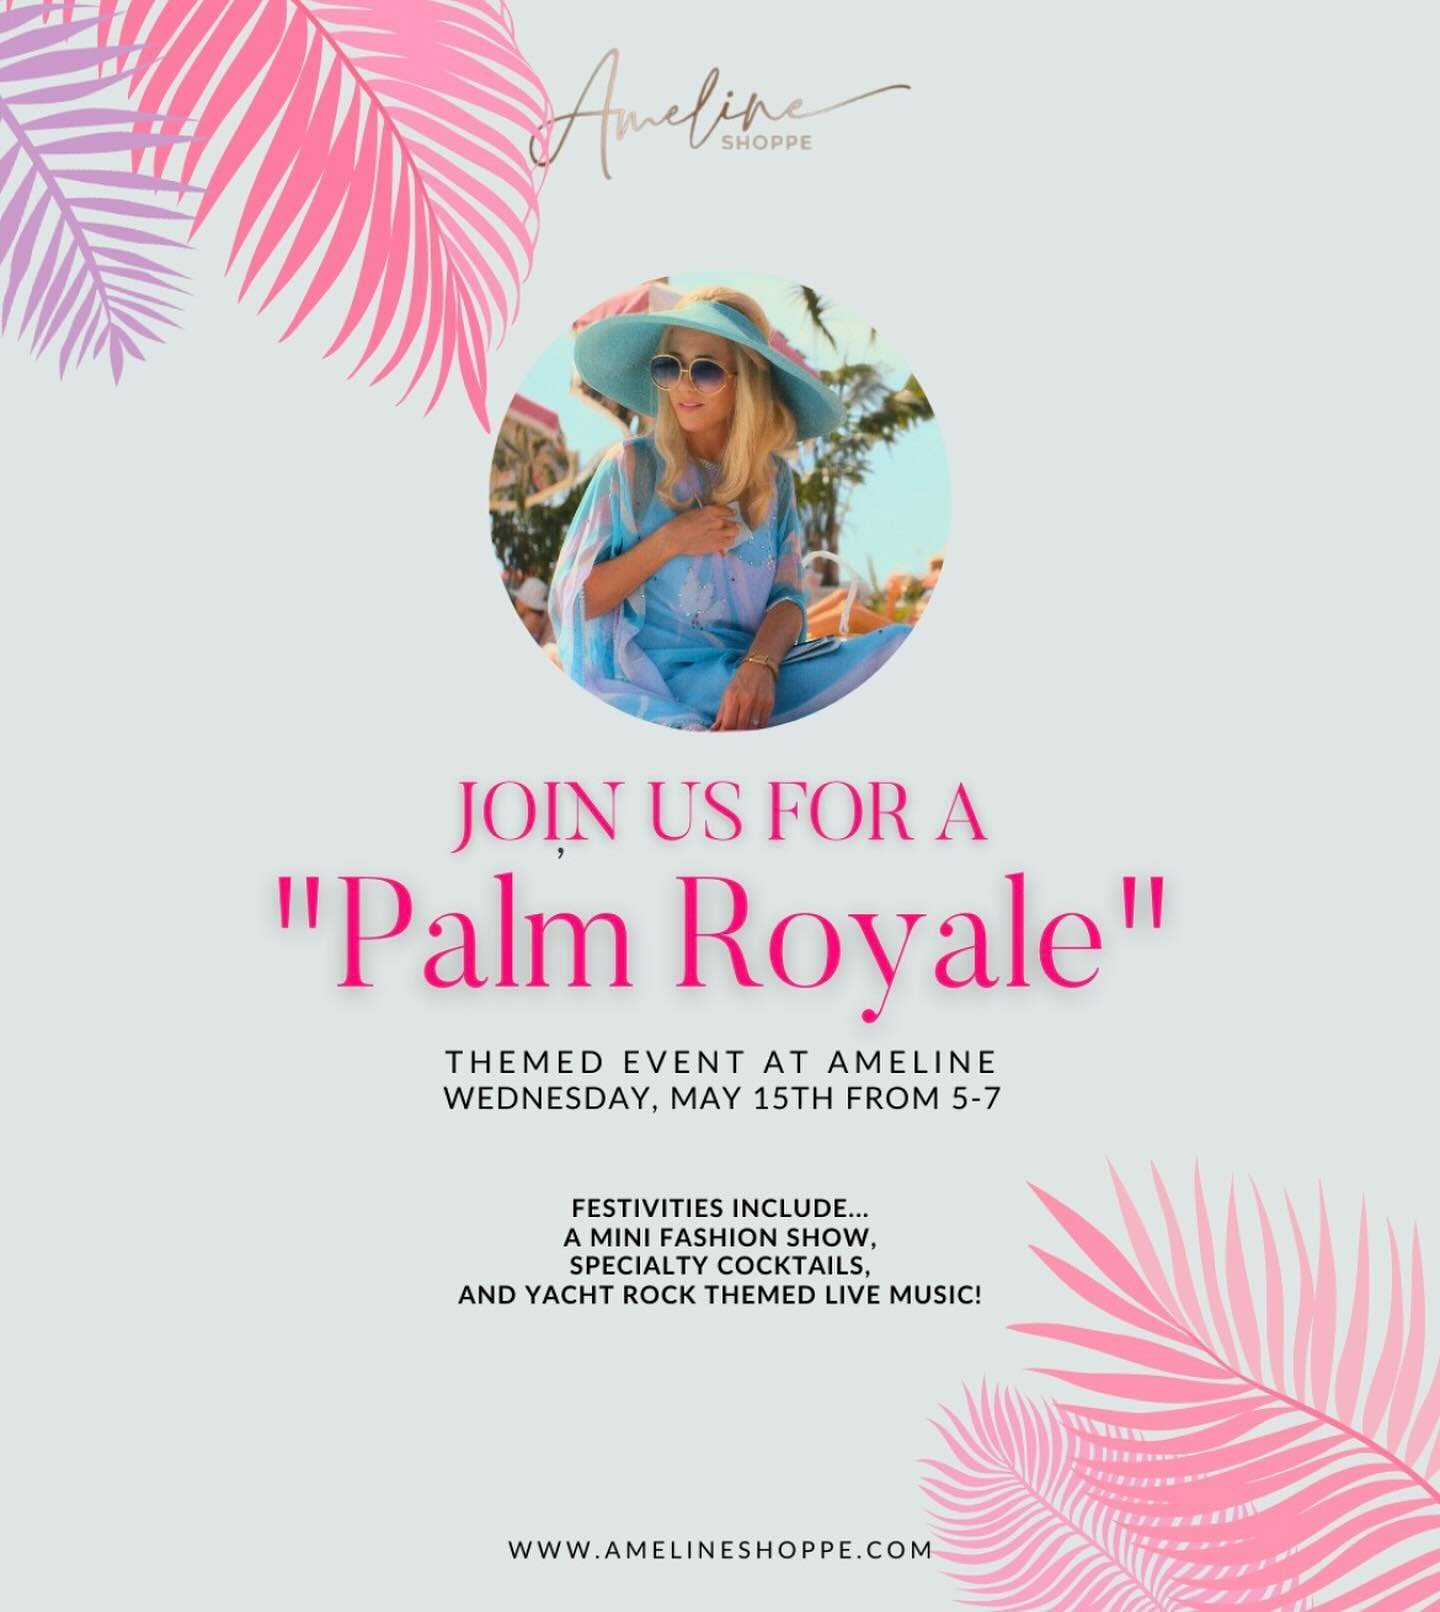 Visit Ameline Shoppe's &quot;Palm Royale&quot; inspired event on Wednesday, May 15 from 5 &ndash; 7PM! Shop all the clothes &amp; accessories and take 15% OFF one full priced item of your choice. Enjoy a mini-fashion show, specialty cocktails, yacht 